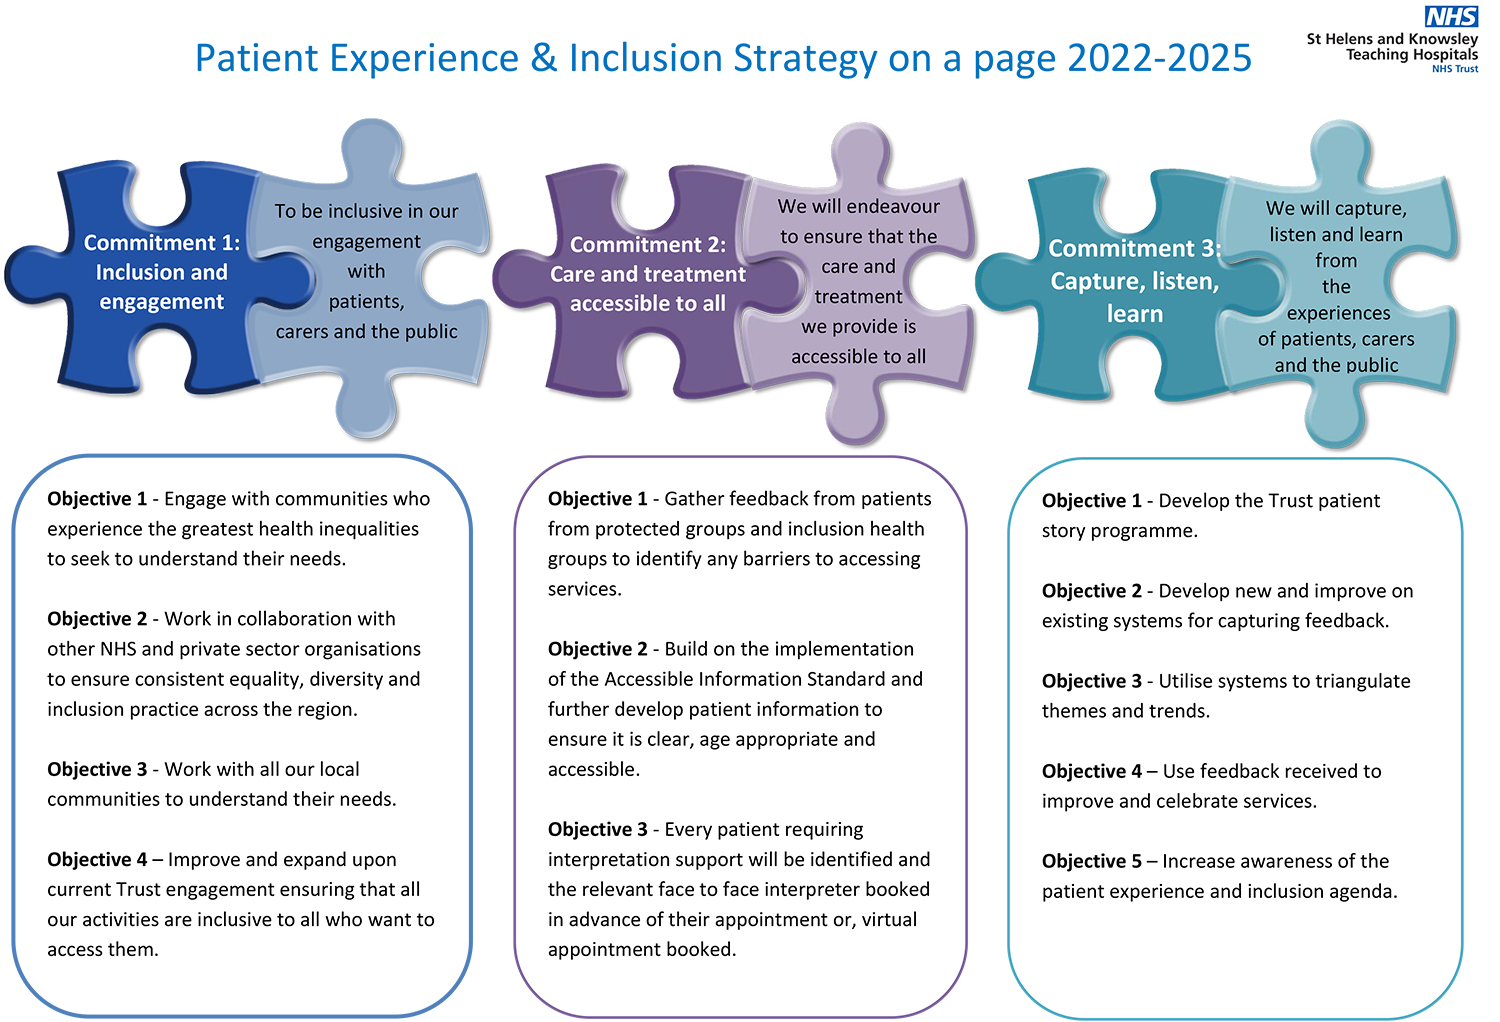 Patient Experience & Inclusion Strategy on a page 2022-2025